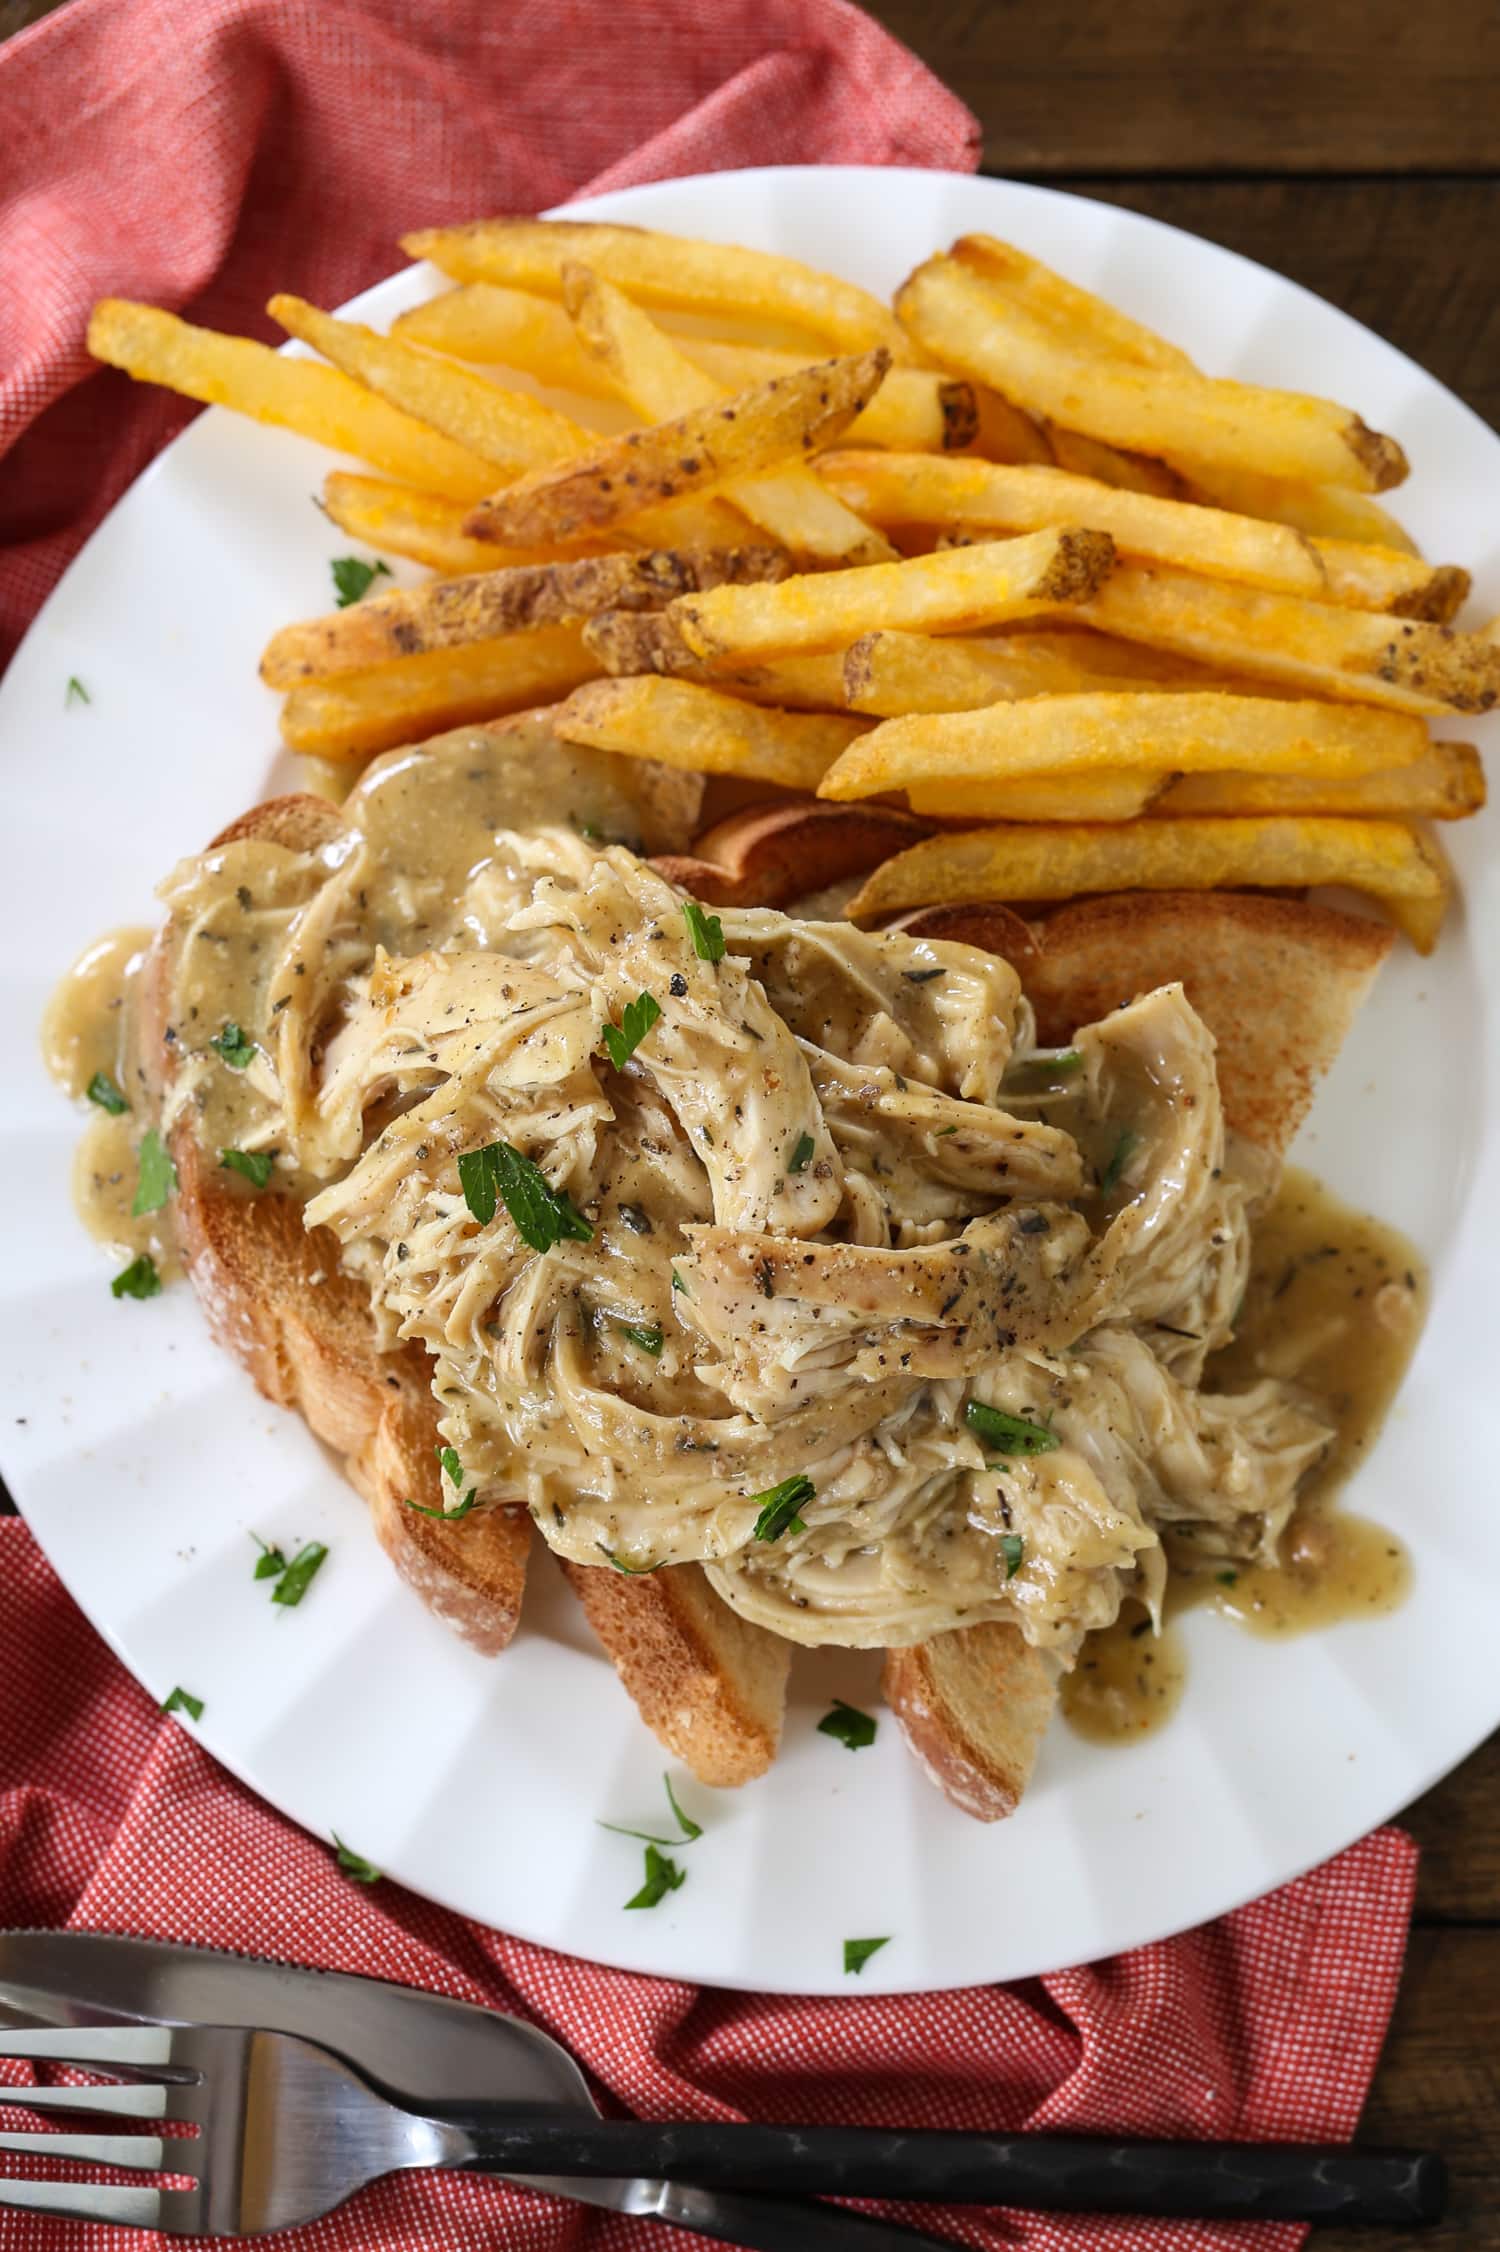 shredded chicken with gravy on toast with fries